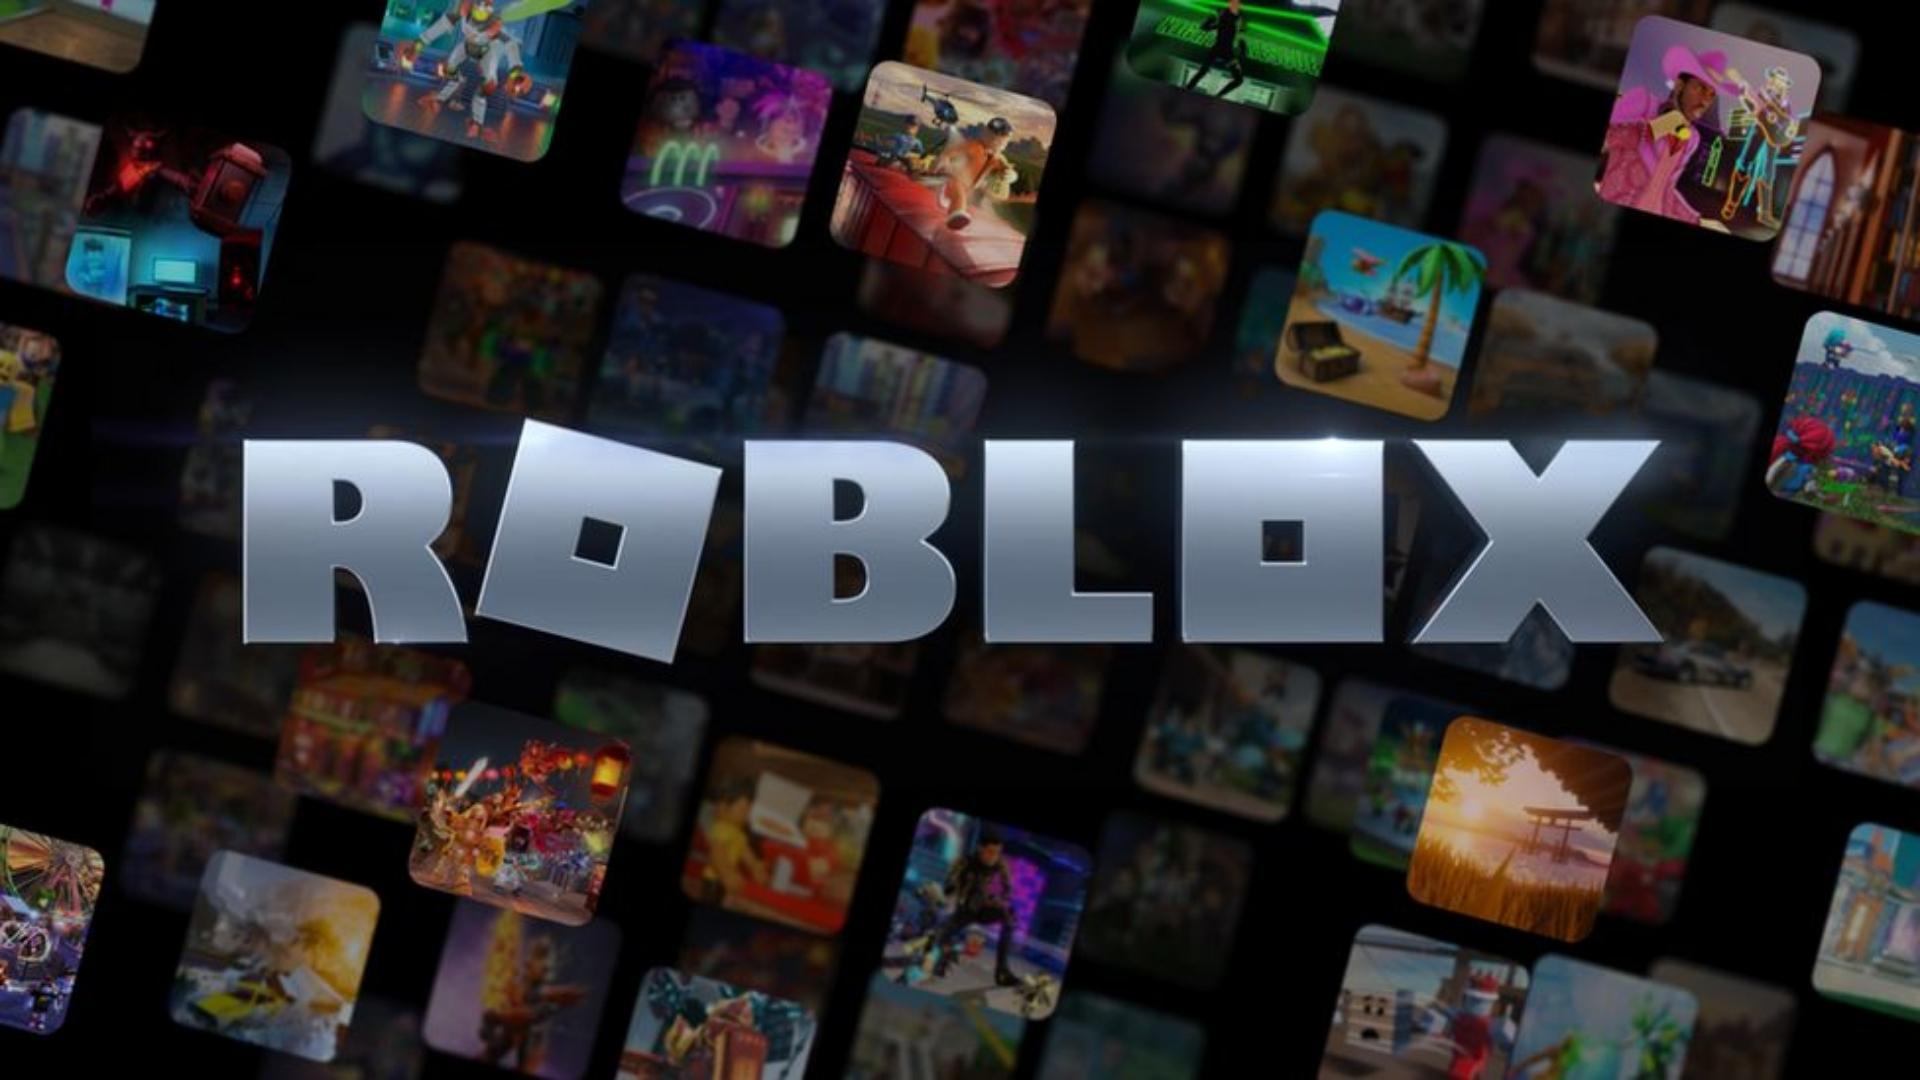 How To Redeem A Roblox Gift Card - Complete Guide 